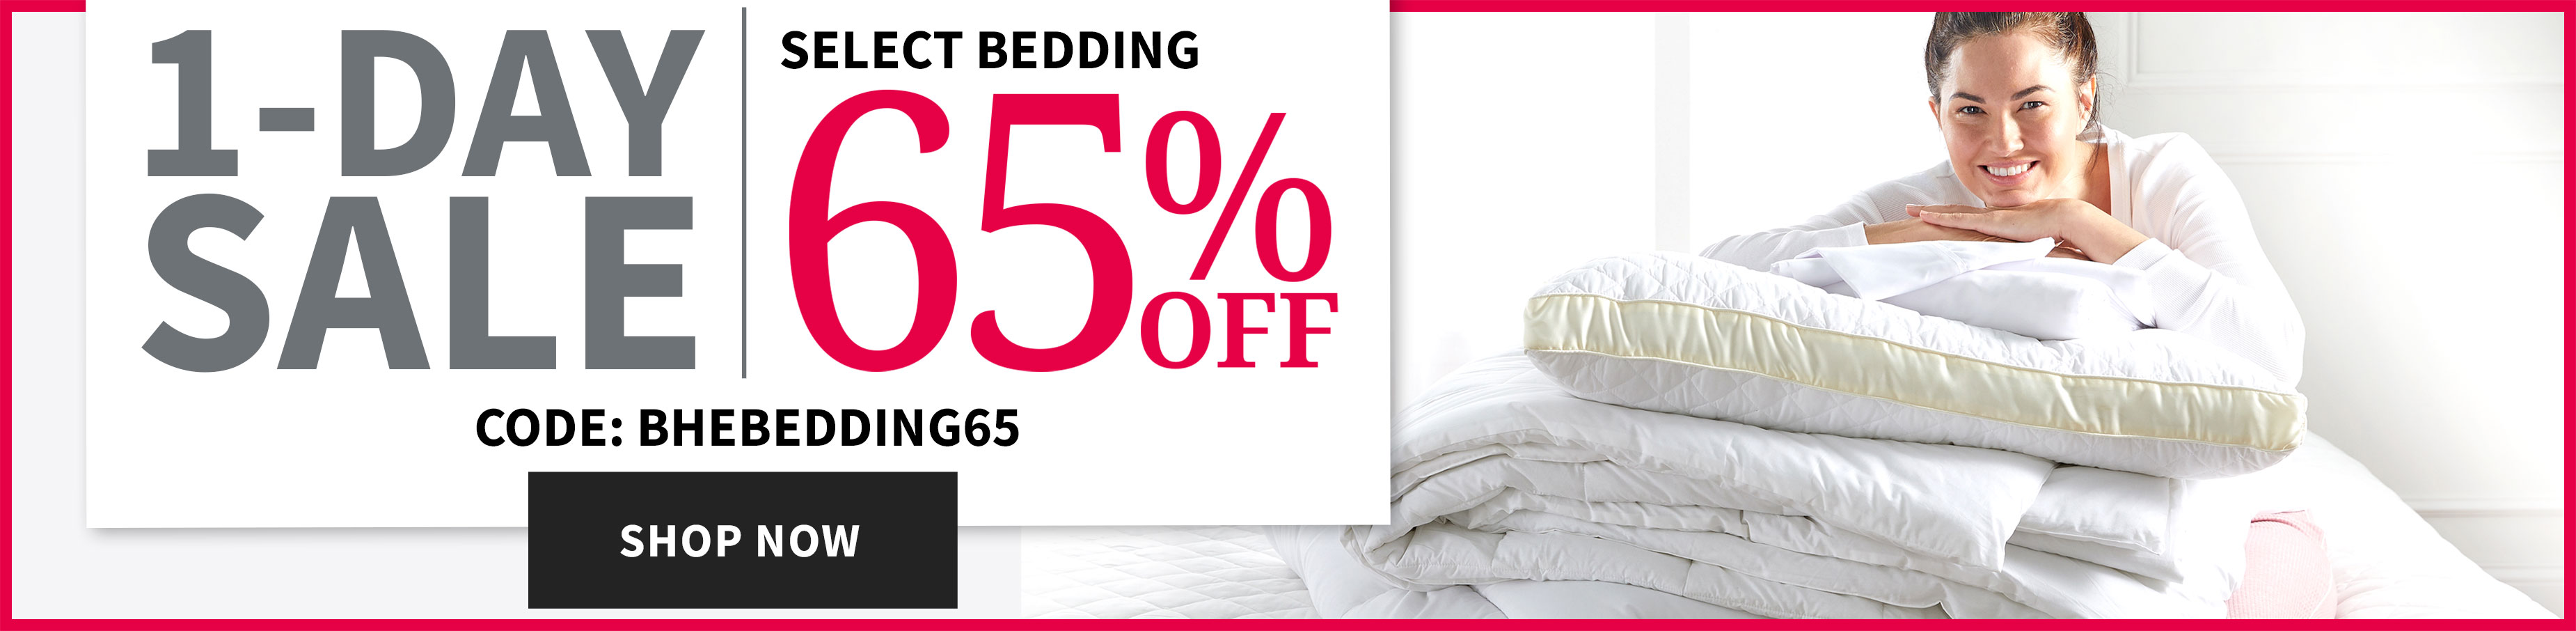 1-Day Sale up to 65% off BEDDING.